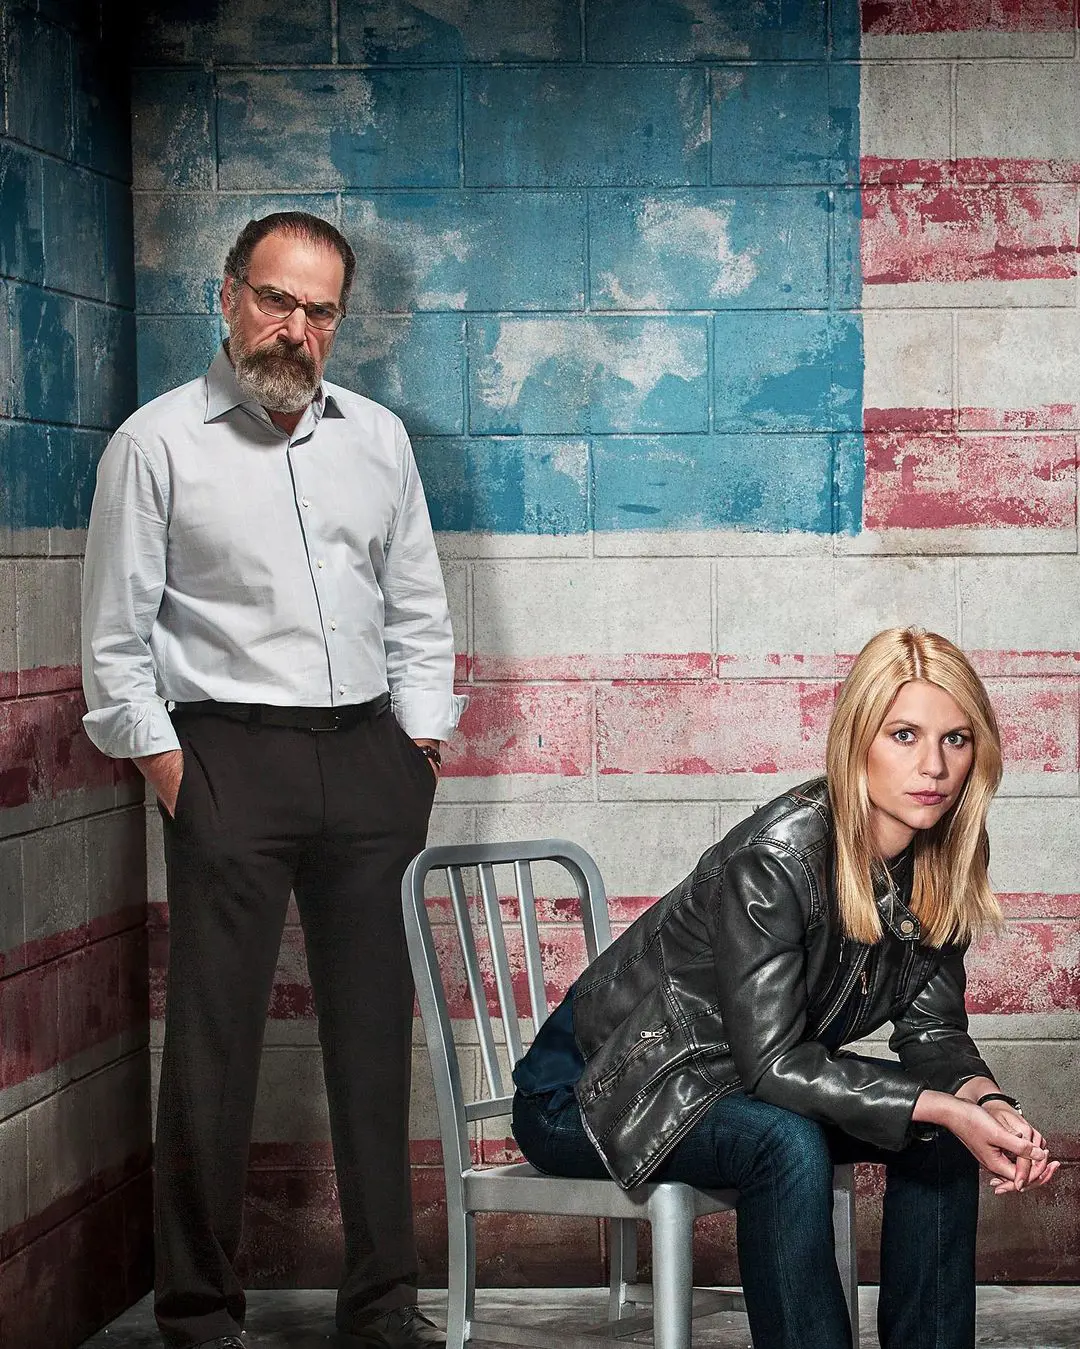 The series Homeland is about the conspiracy against the terrorist and strategy to catch them. It is based on the Israeli Series Prisioners of War